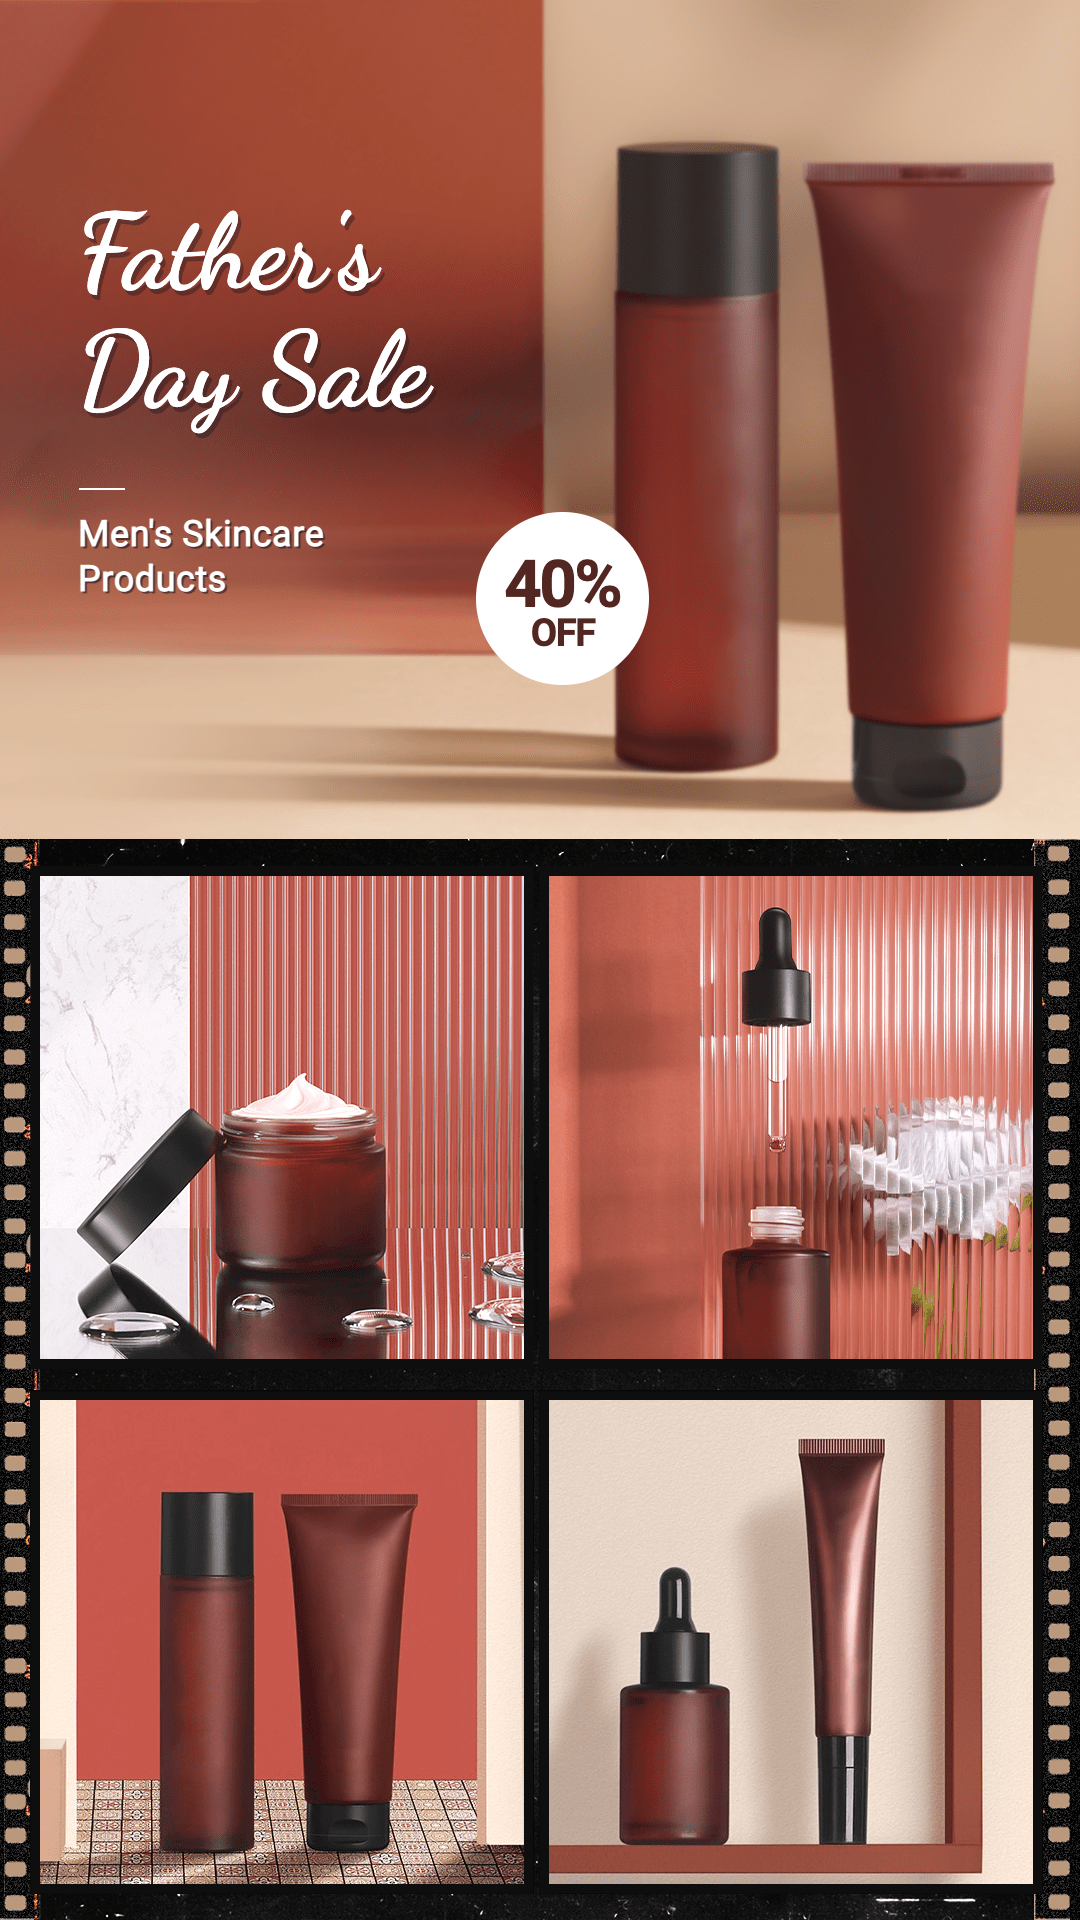 Father's Day Men's Grooming Skincare Products Discount Sale Promo Multiple Pictures Film Simulation Ecommerce Story预览效果